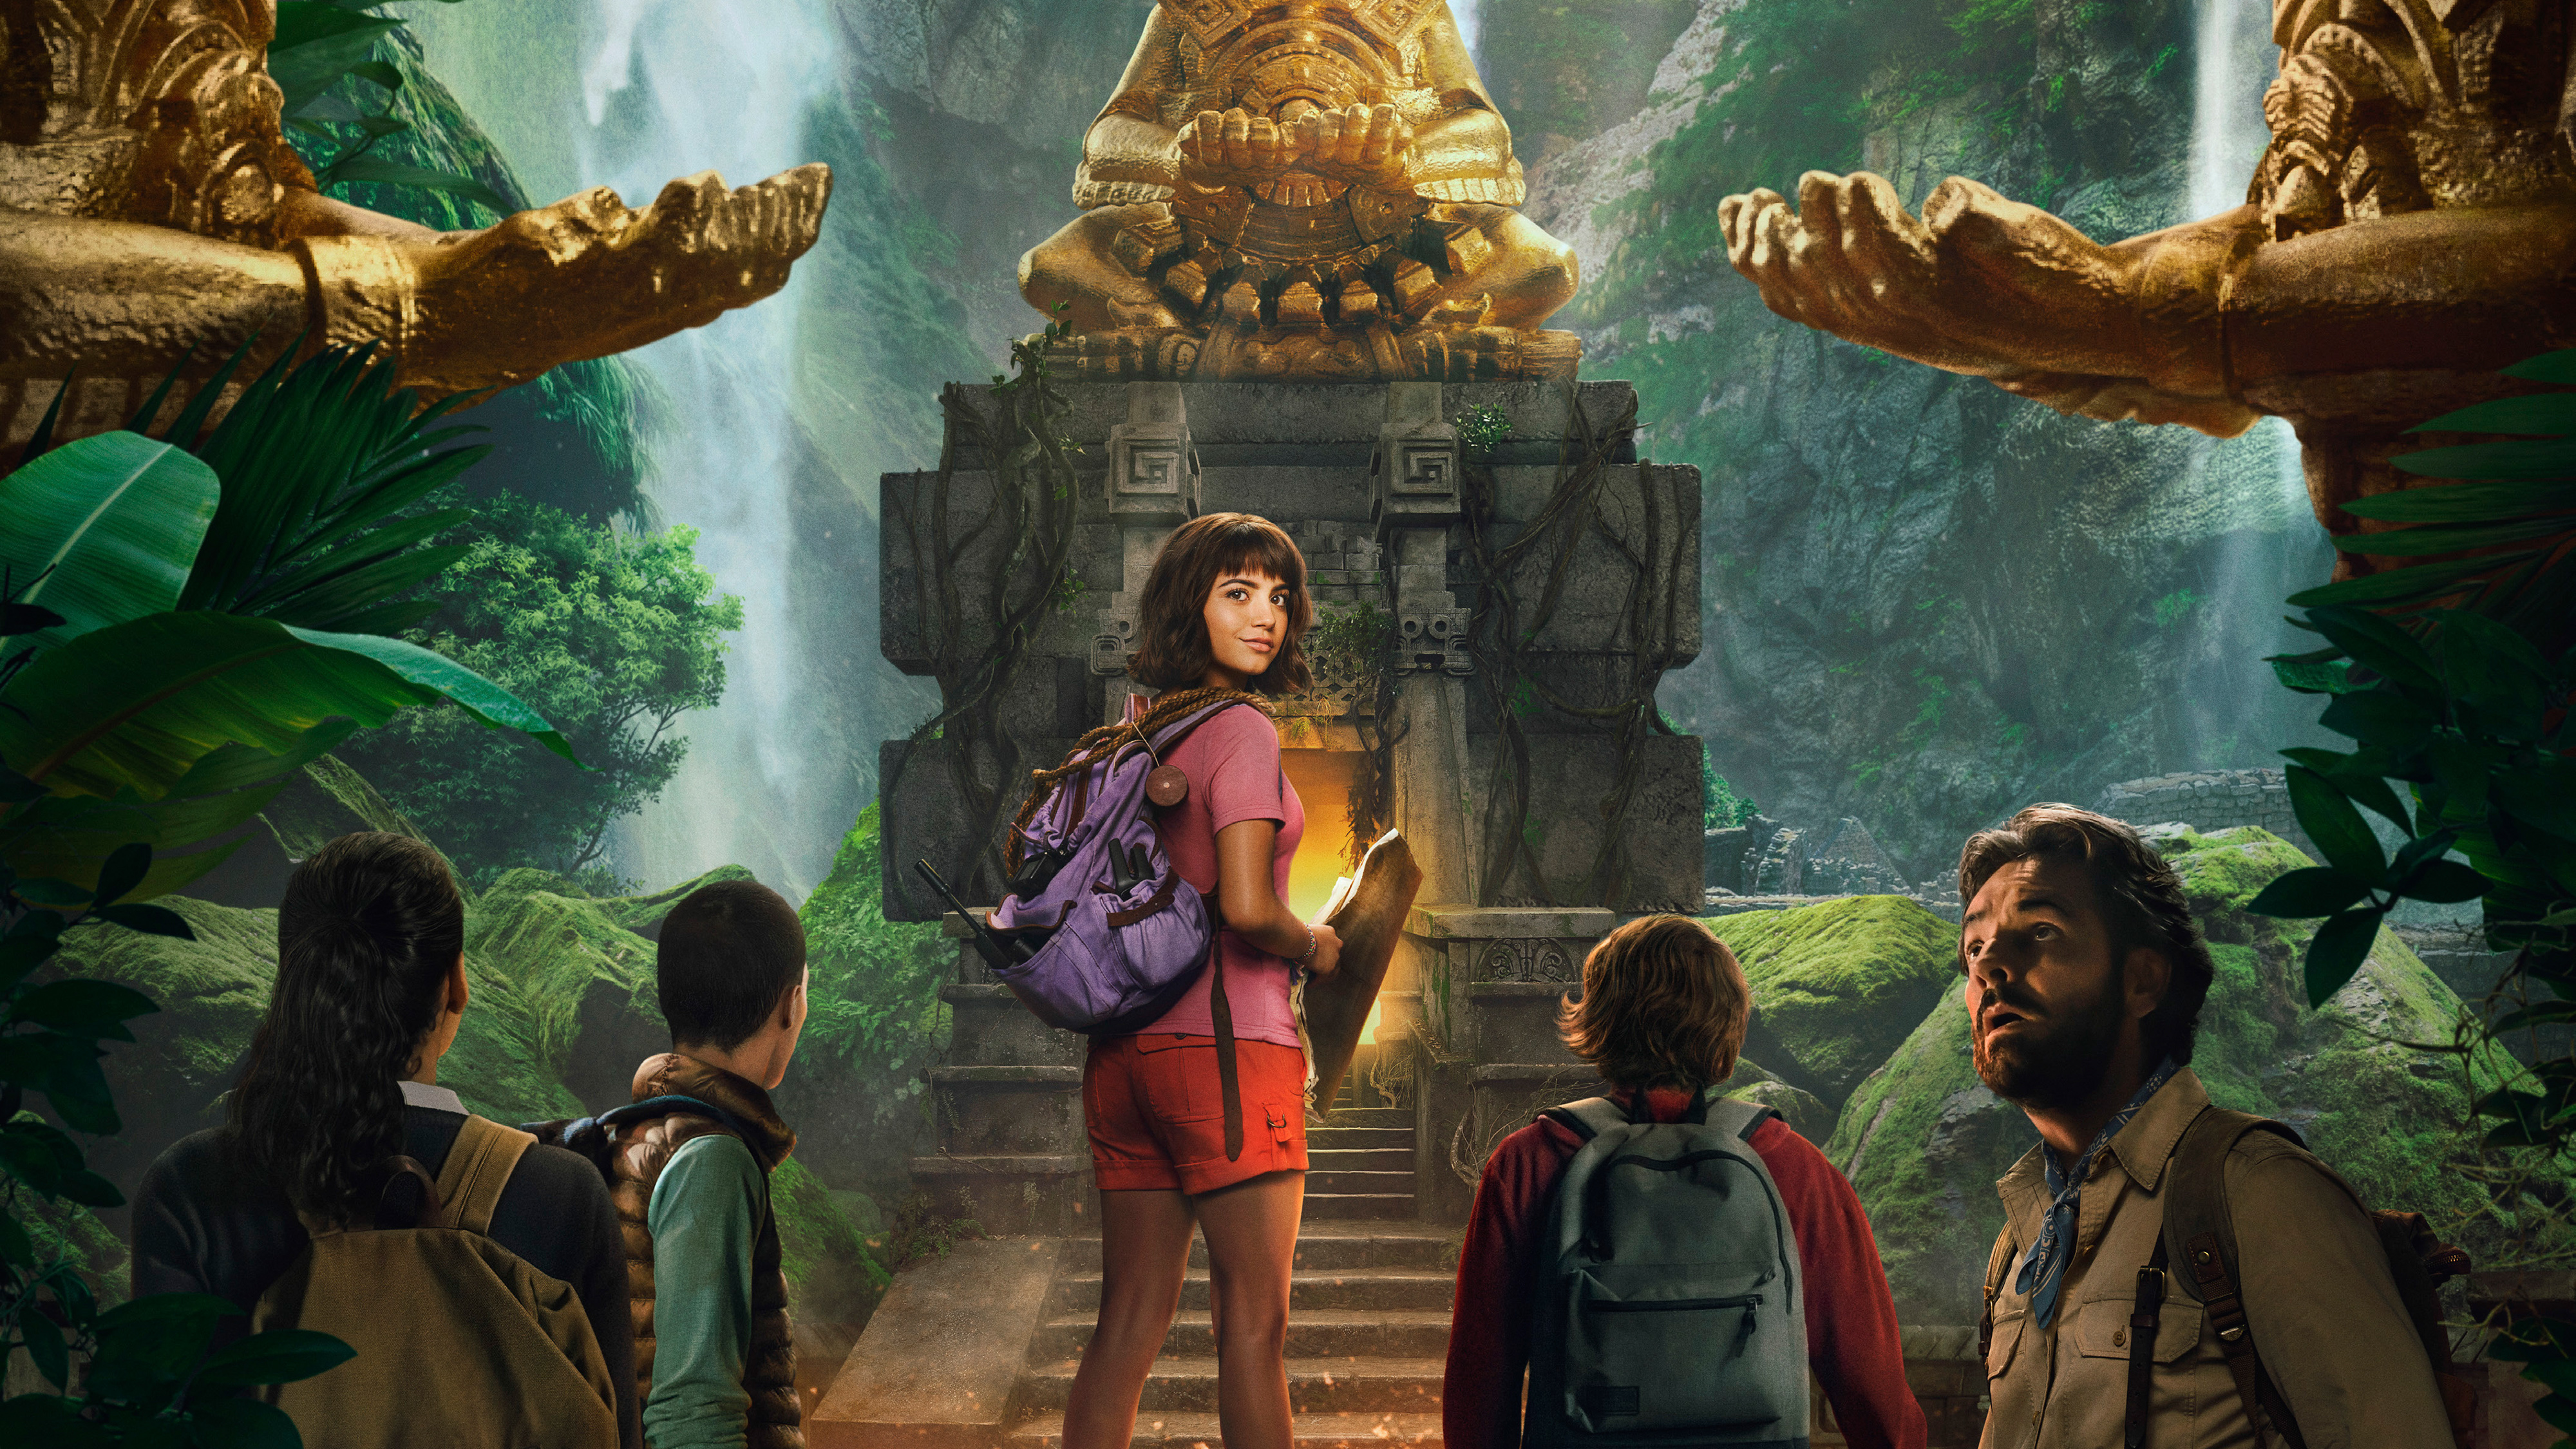 movie, dora and the lost city of gold, dora márquez, isabela merced